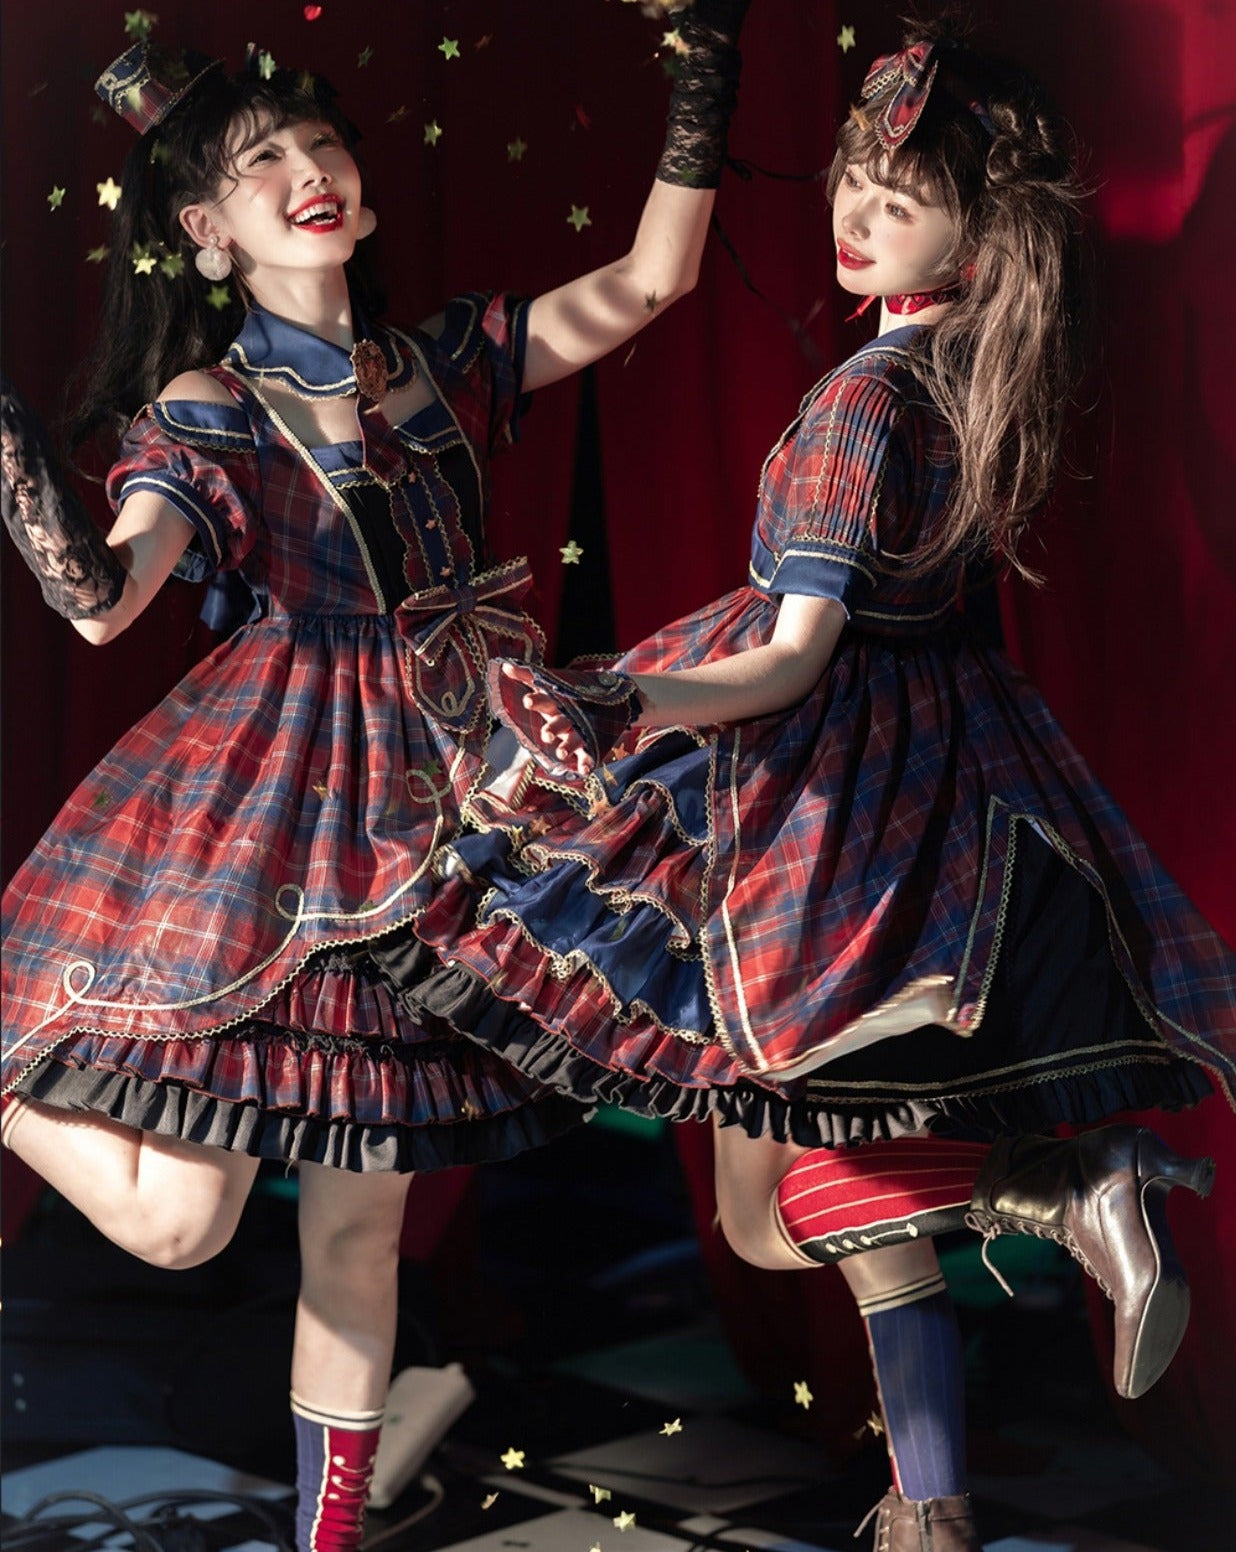 Star Song check idol style dress